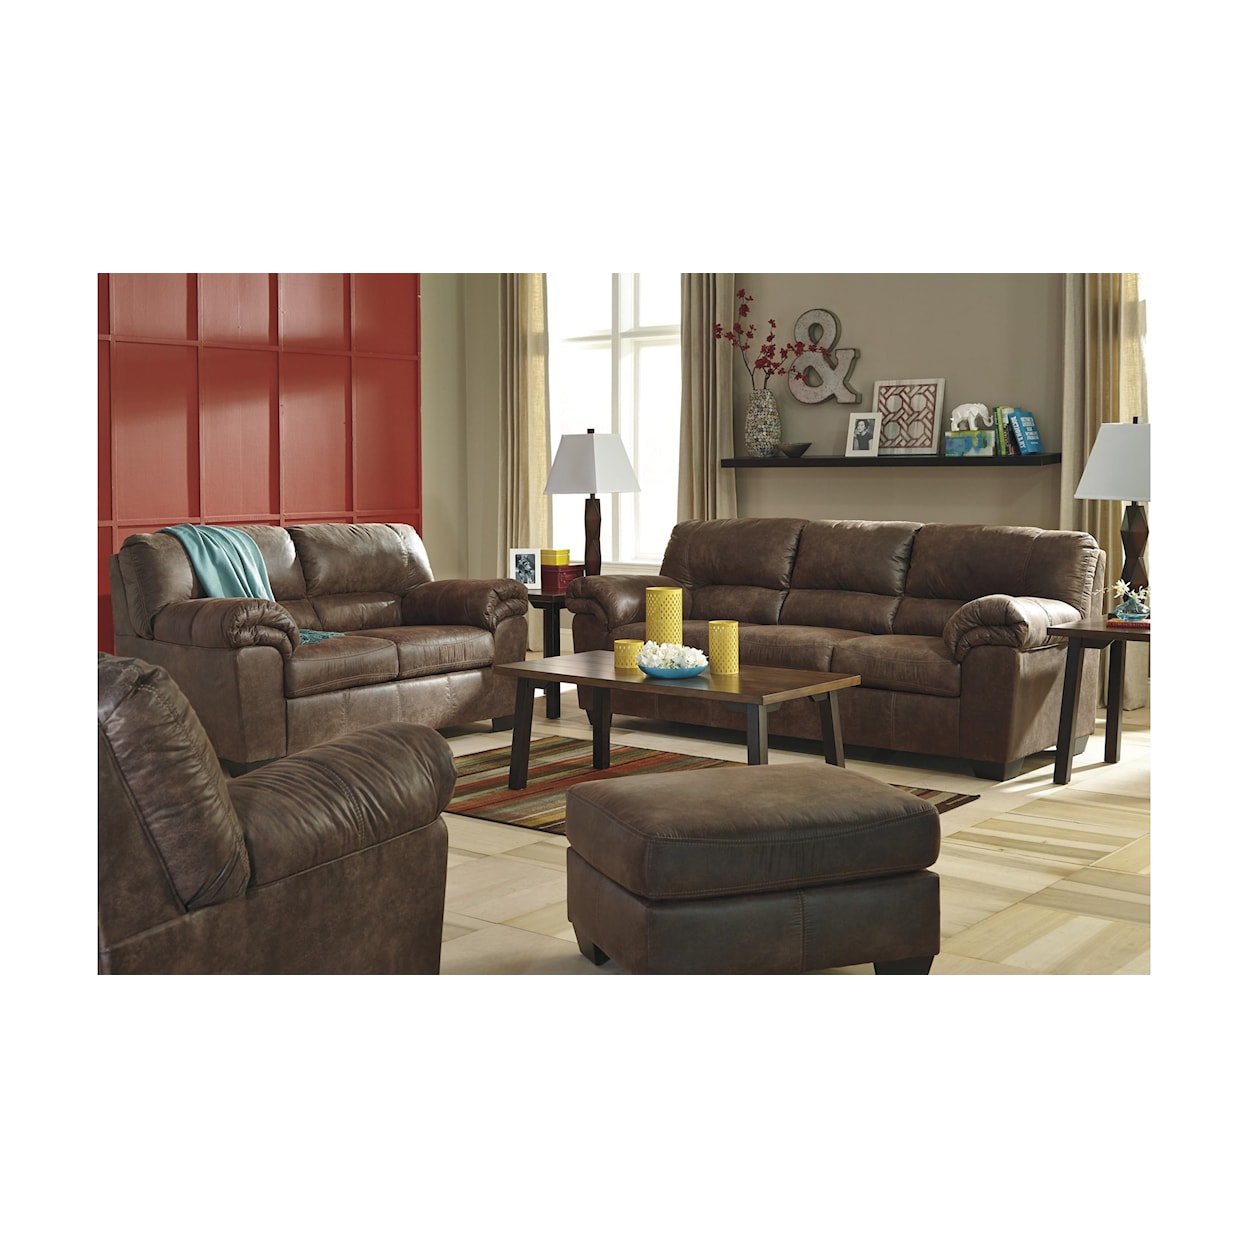 Signature Design by Ashley Bladen Sofa, Loveseat, Chair, and Ottoman